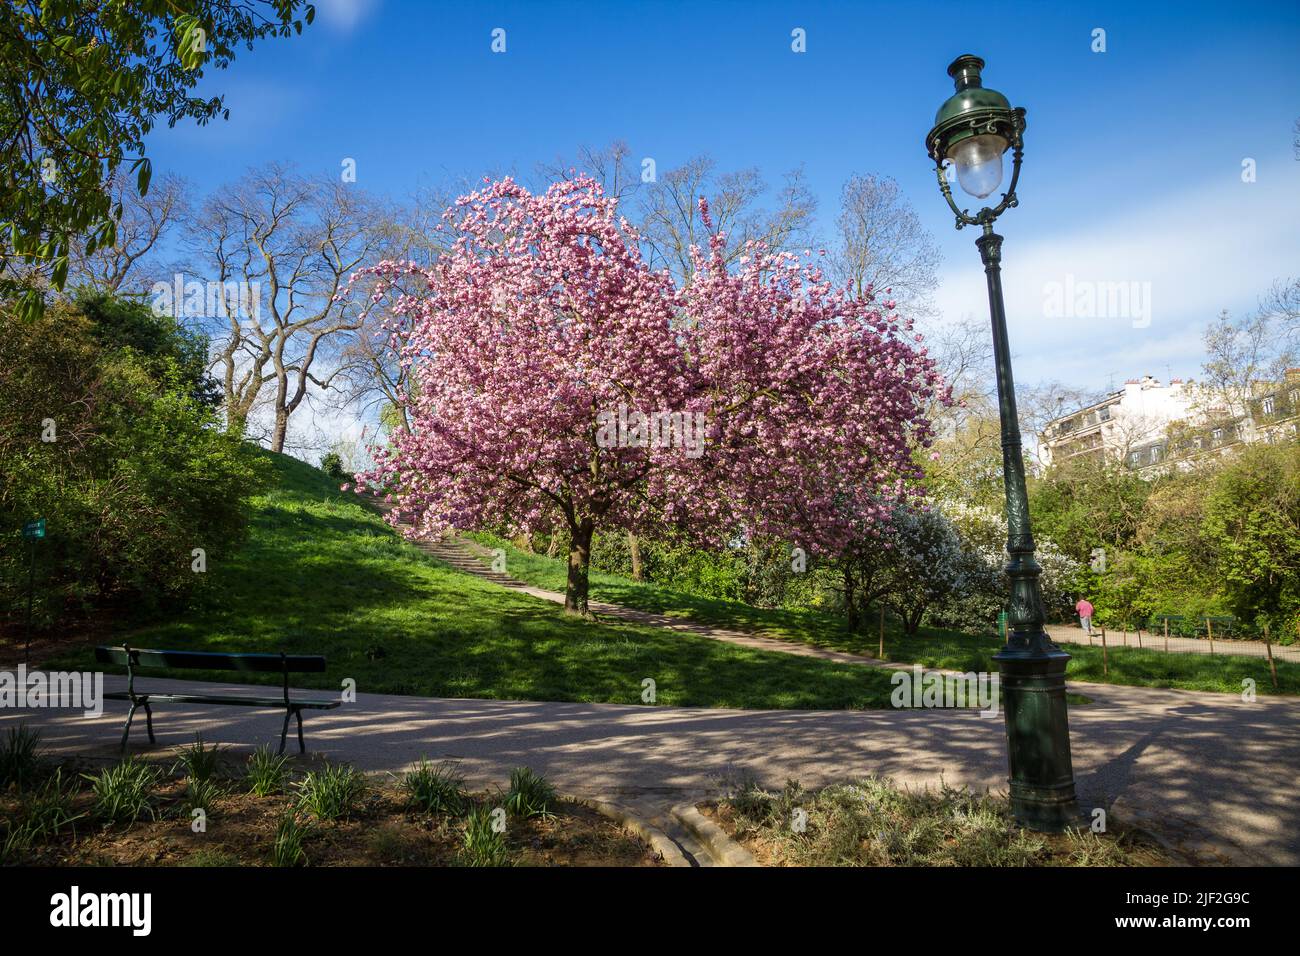 Japanese cherry blossom in Buttes Chaumont Park. Blue sky background. Stock Photo